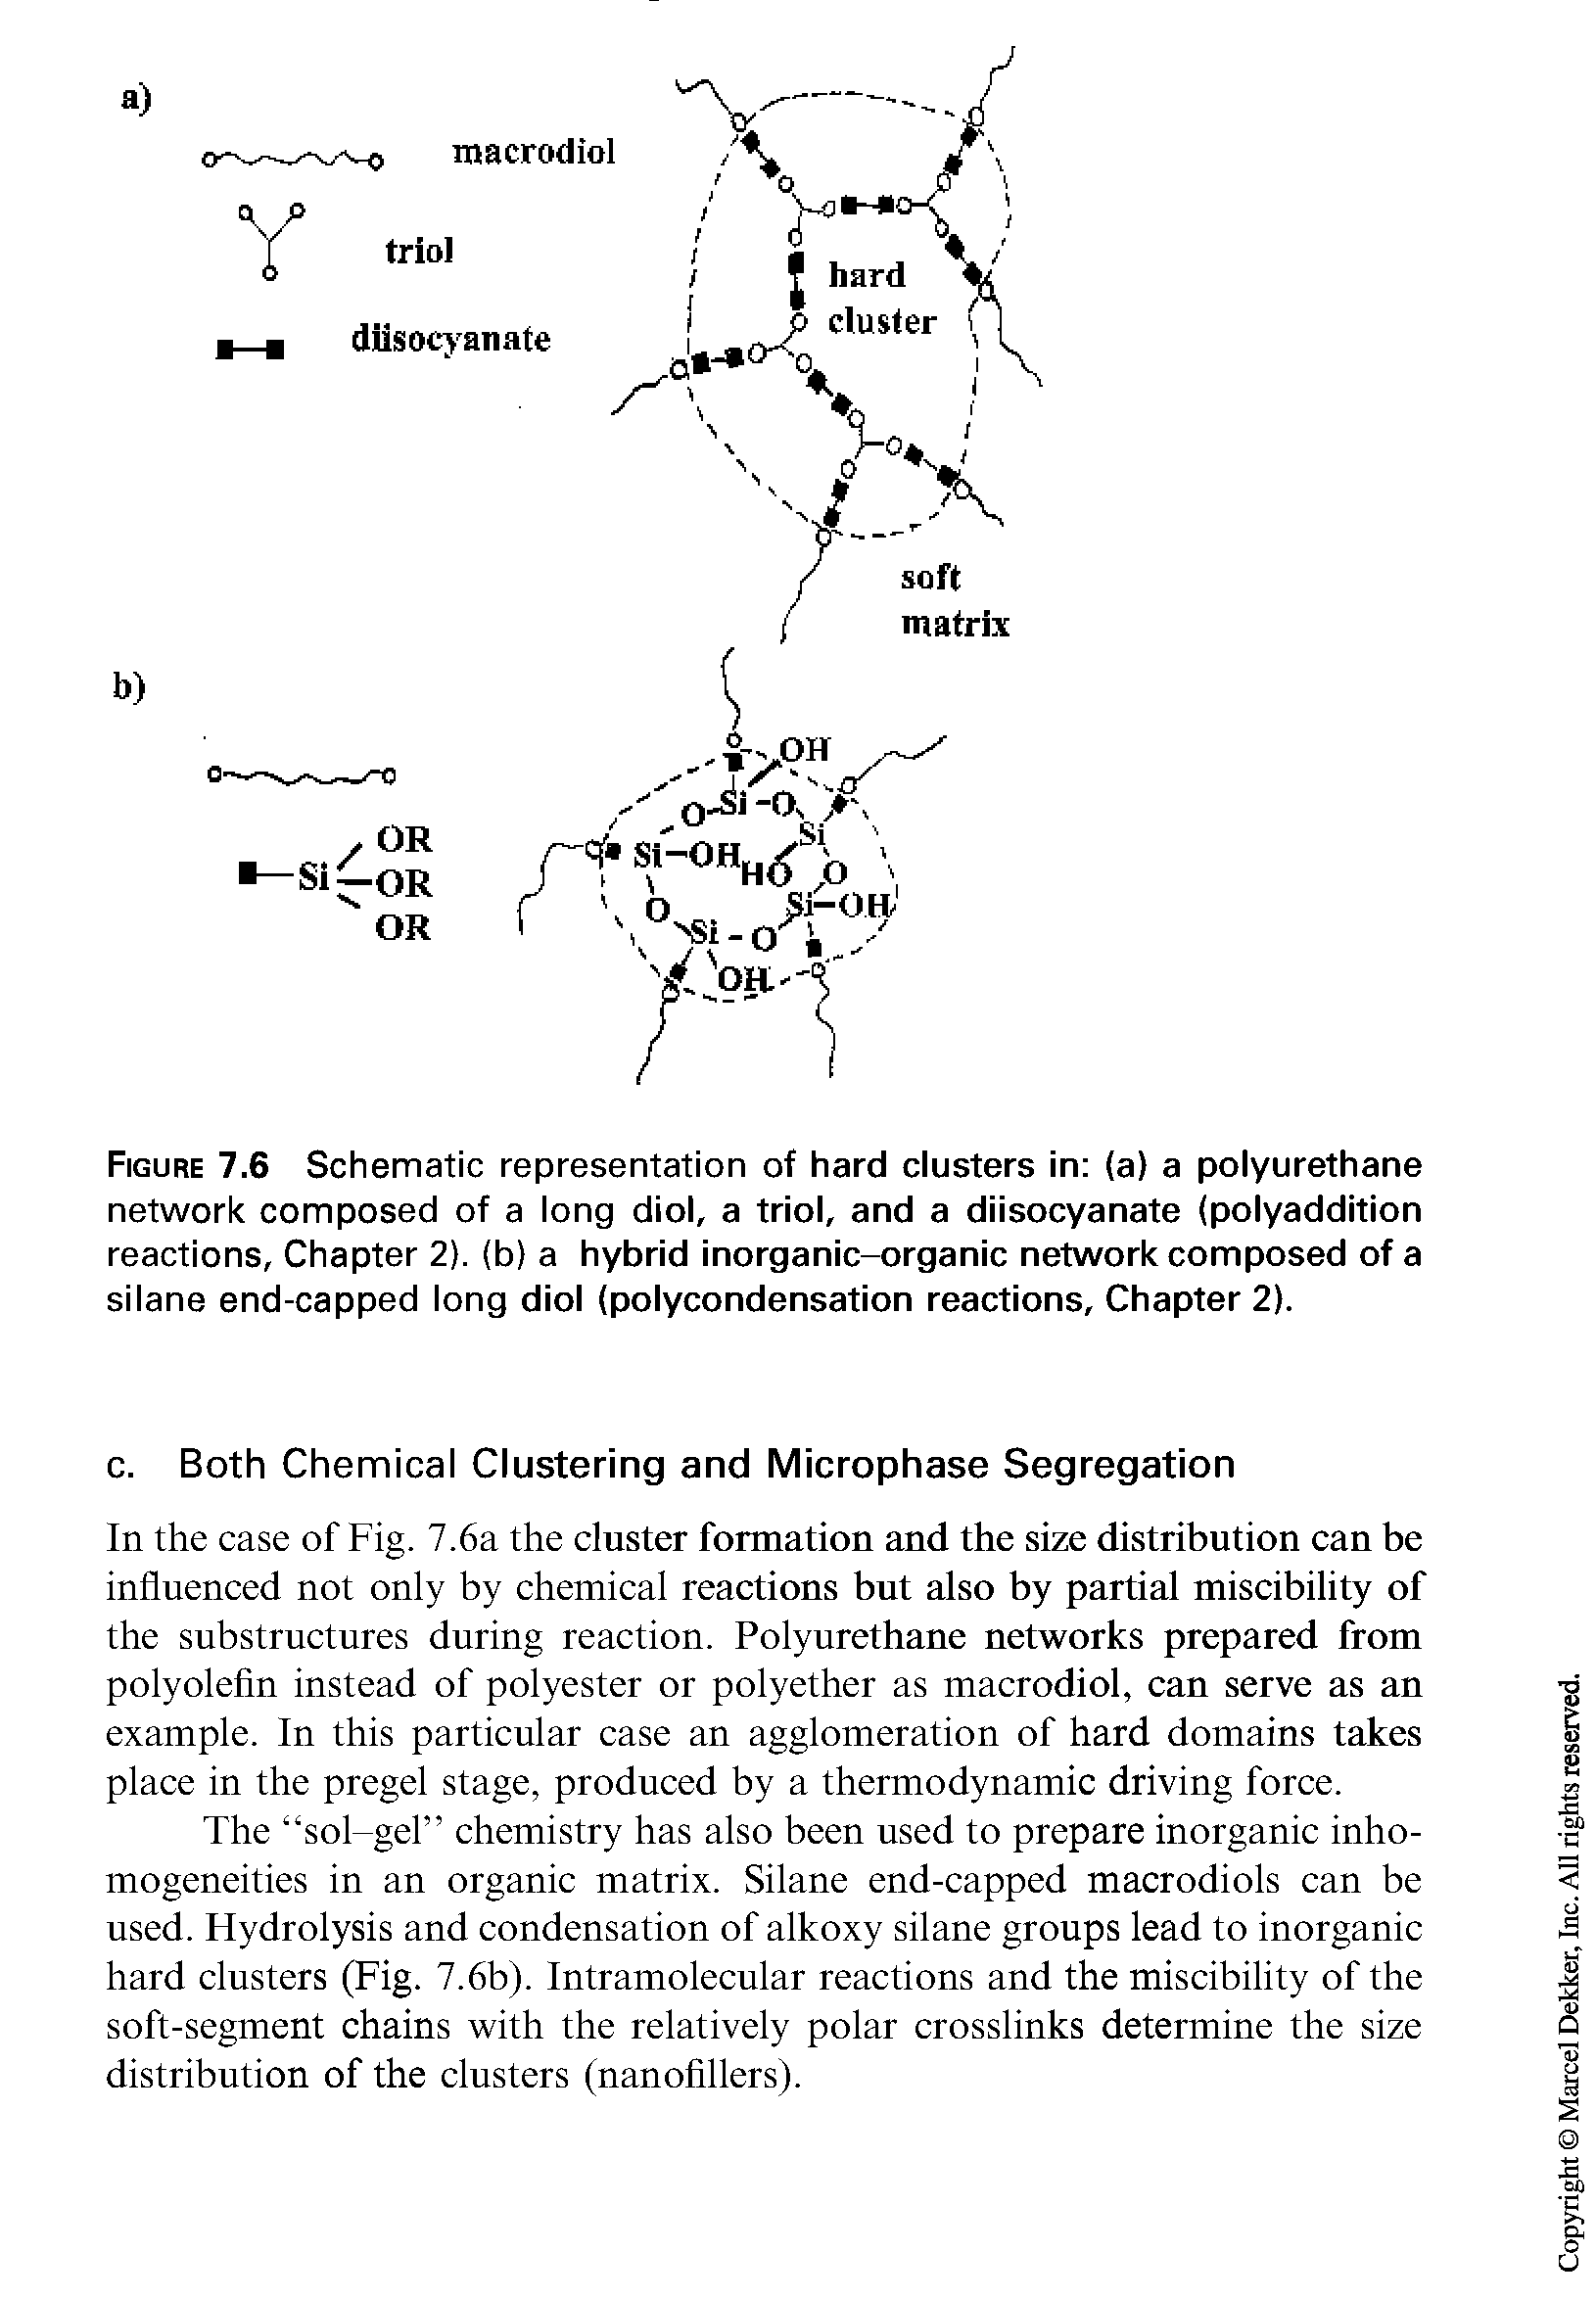 Figure 7.6 Schematic representation of hard clusters in (a) a polyurethane network composed of a long diol, a triol, and a diisocyanate (polyaddition reactions, Chapter 2). (b) a hybrid inorganic-organic network composed of a silane end-capped long diol (polycondensation reactions, Chapter 2).